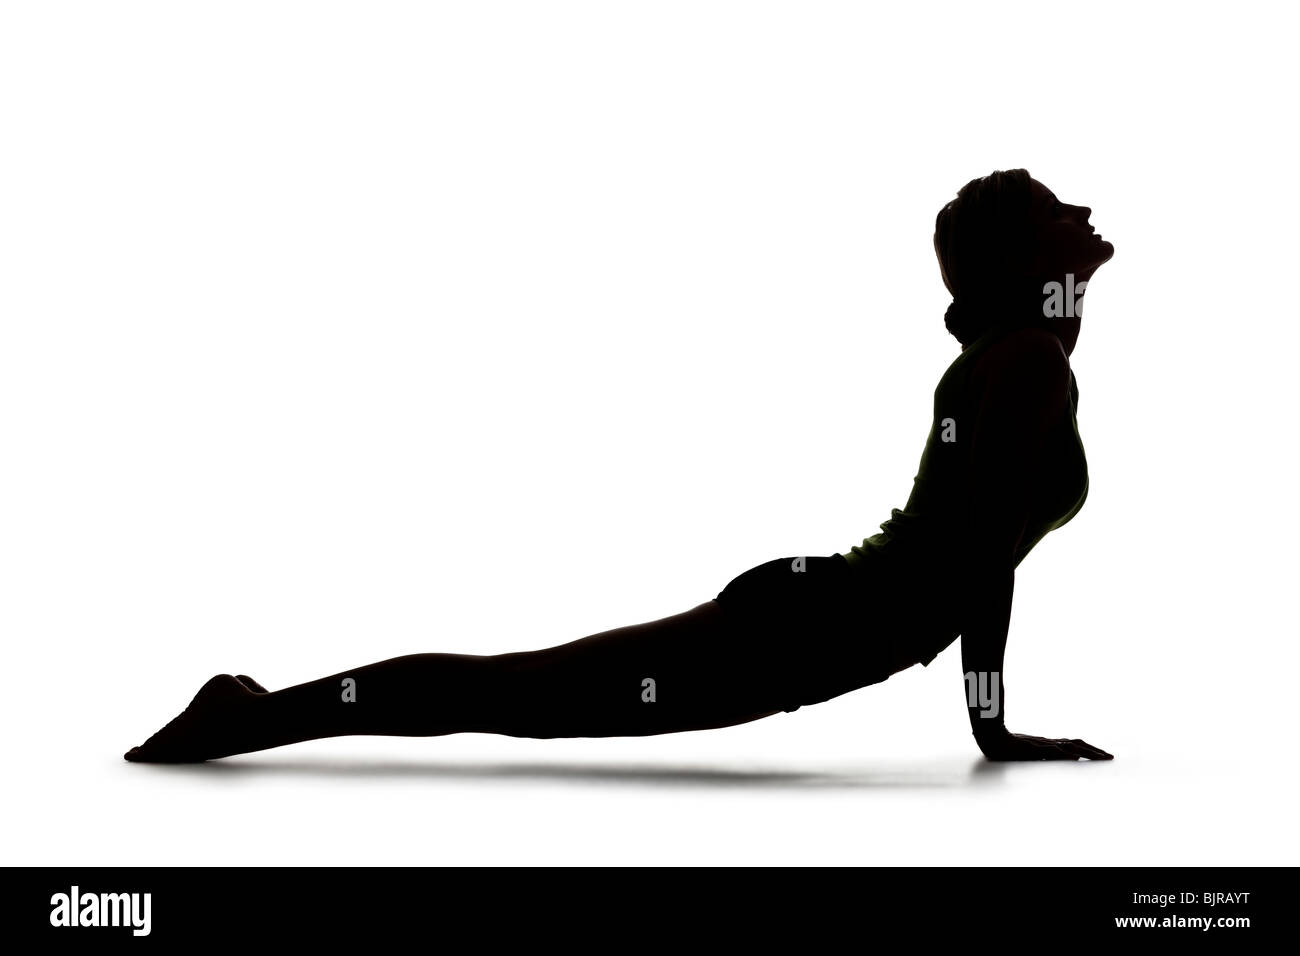 USA, Utah, Orem, Silhouette of woman in cobra pose against white background Stock Photo